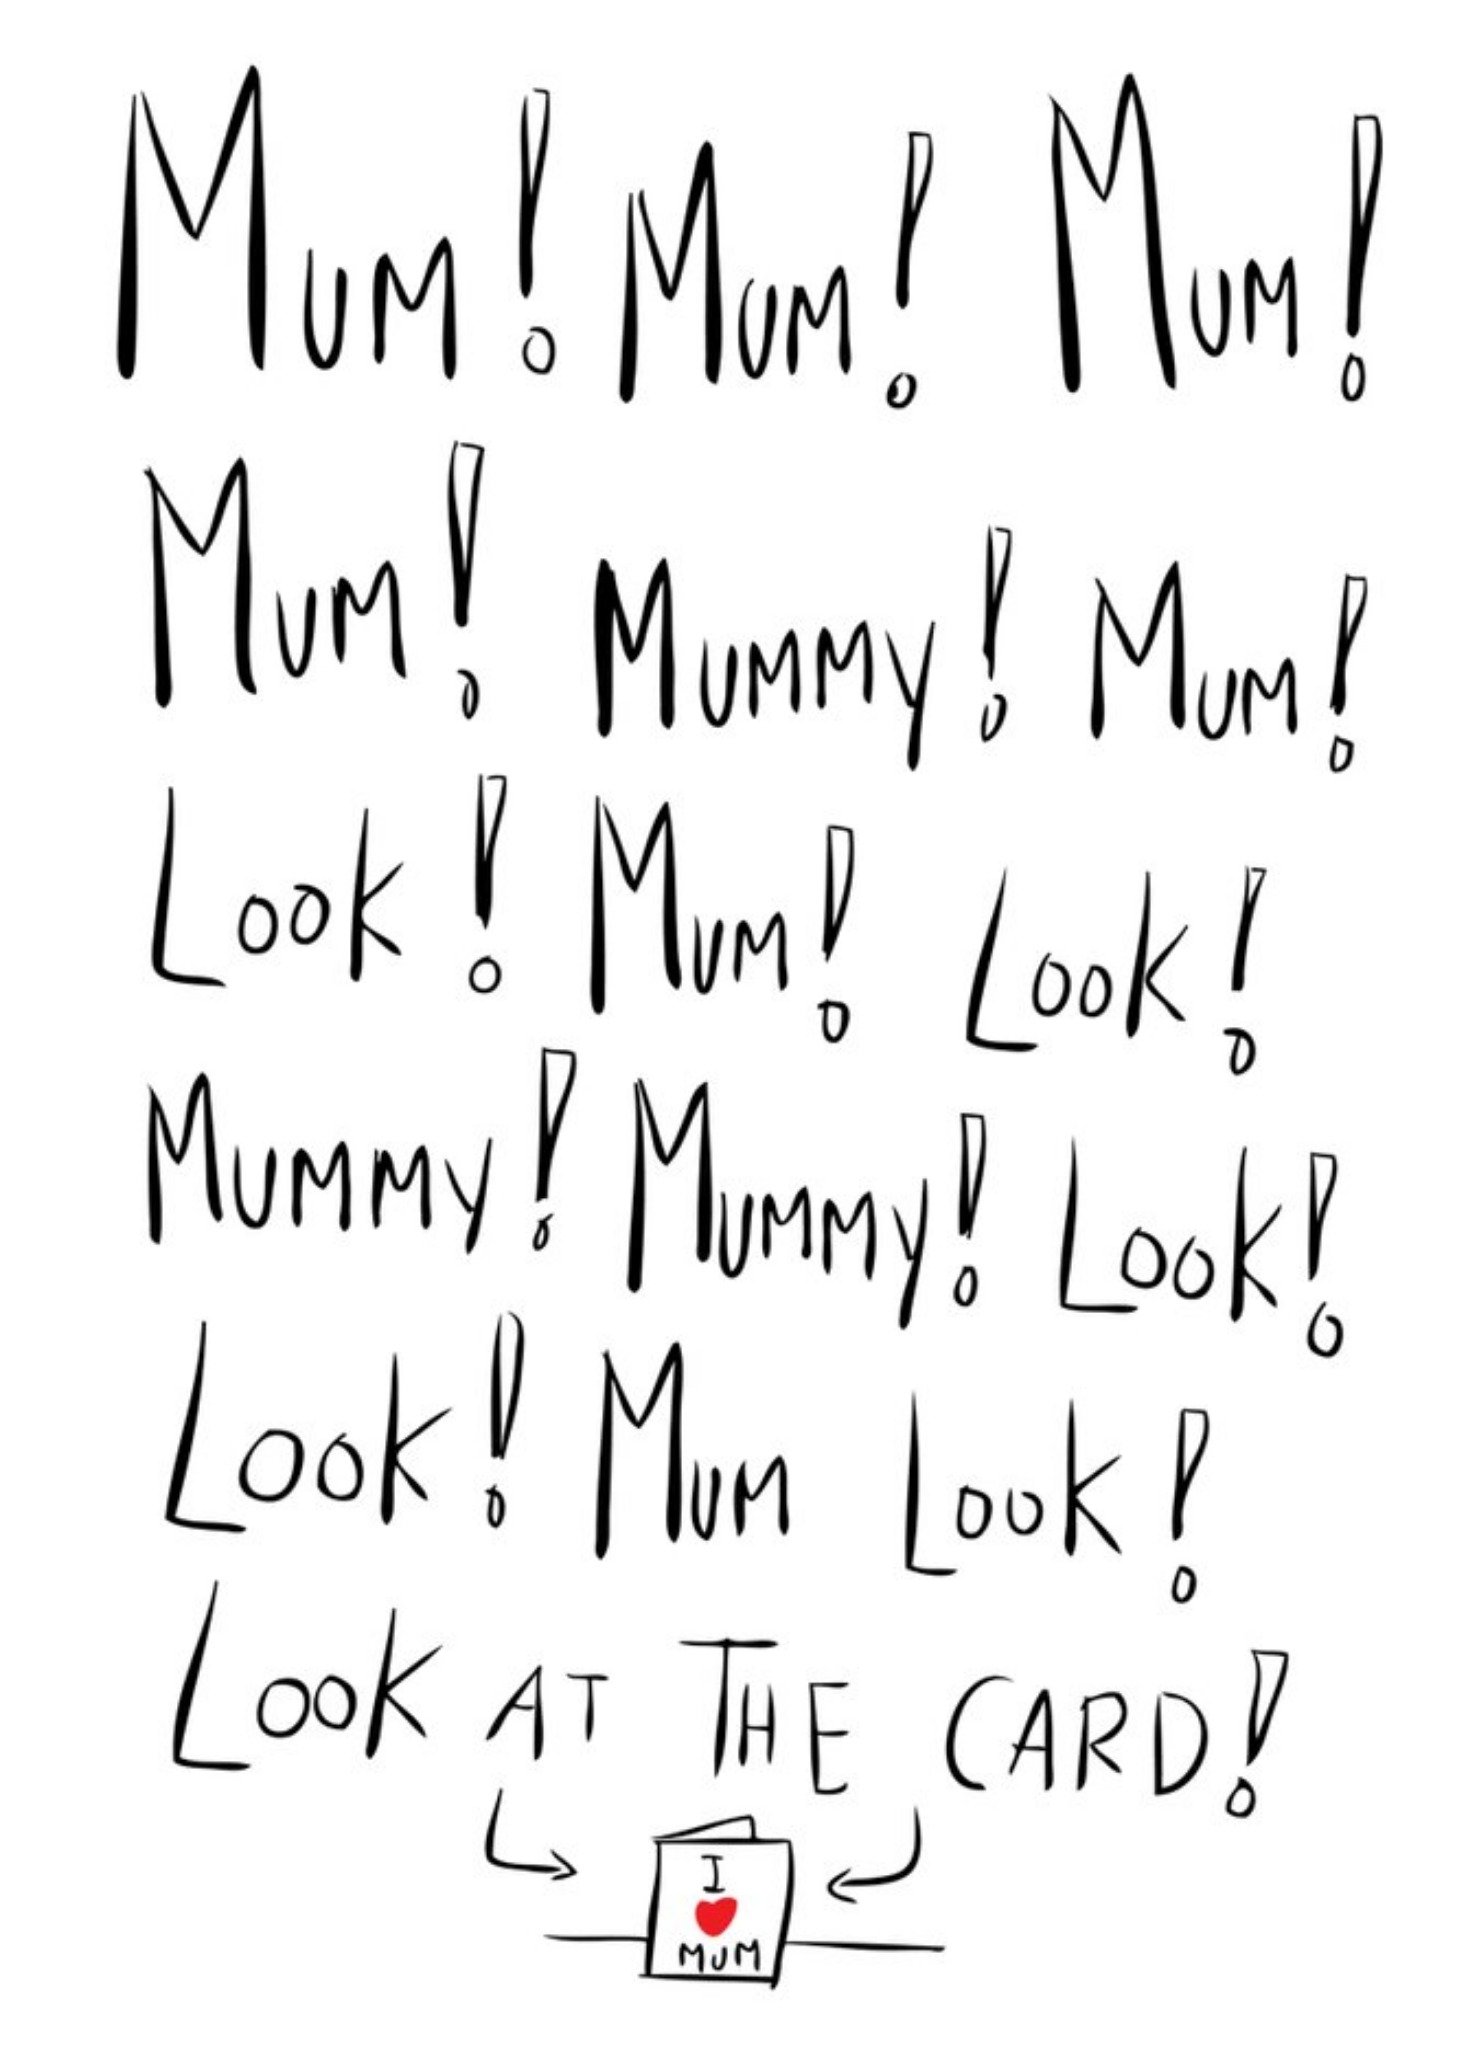 Moonpig Handwritten Repetitive Typography On A White Background Mum Look At This Humourous Card, Lar